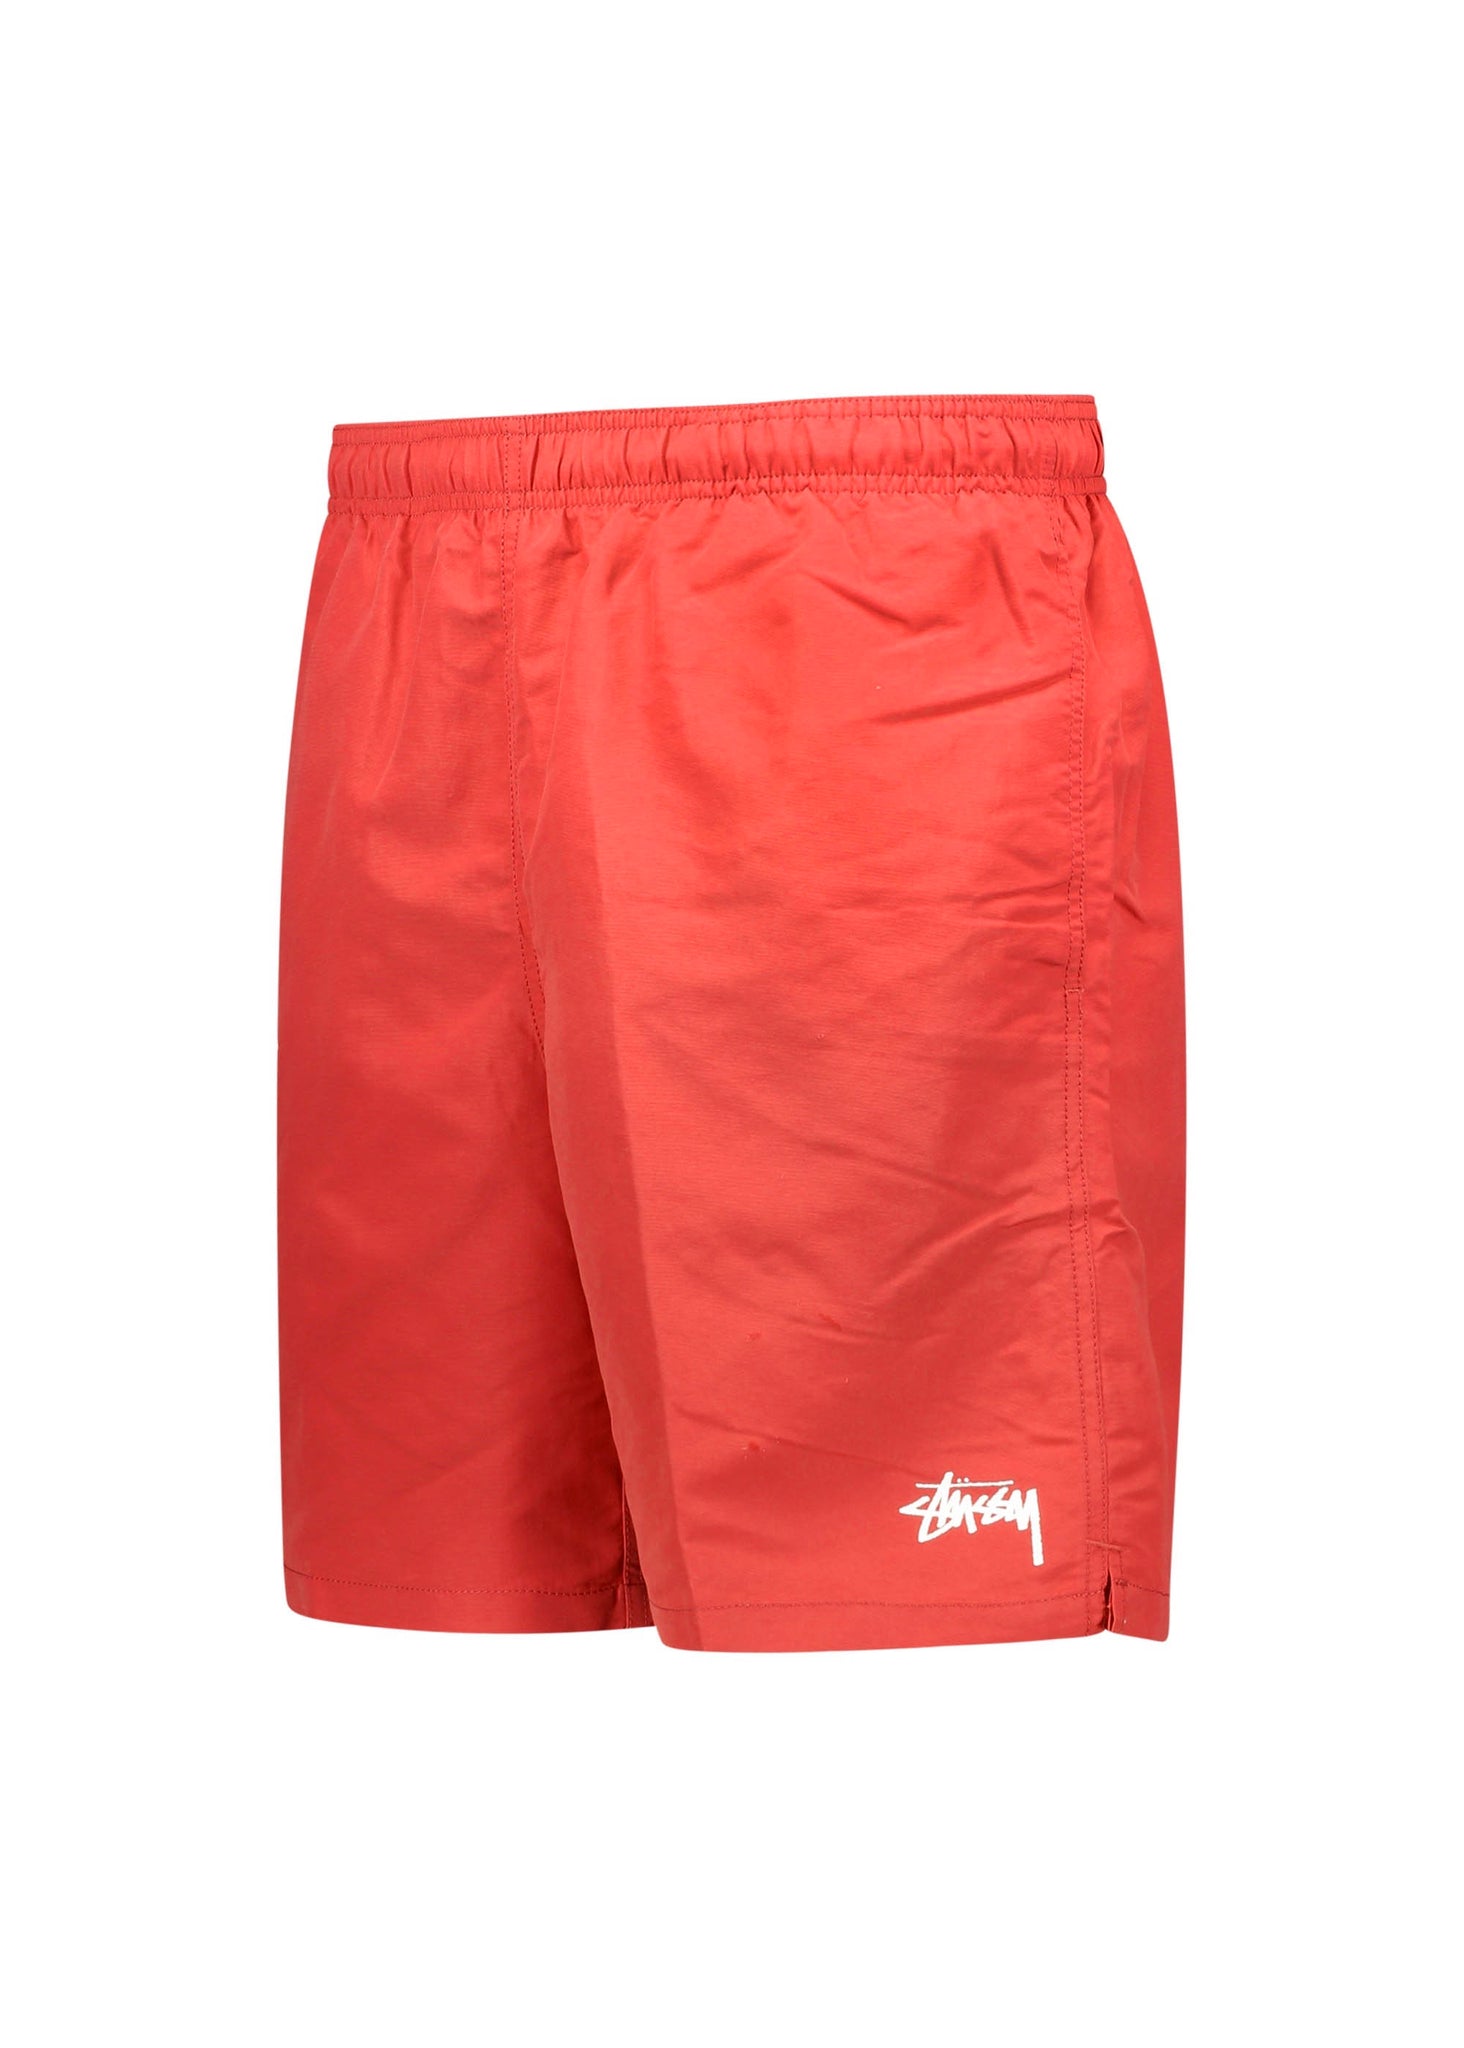 Stussy Stock Water Short - Red